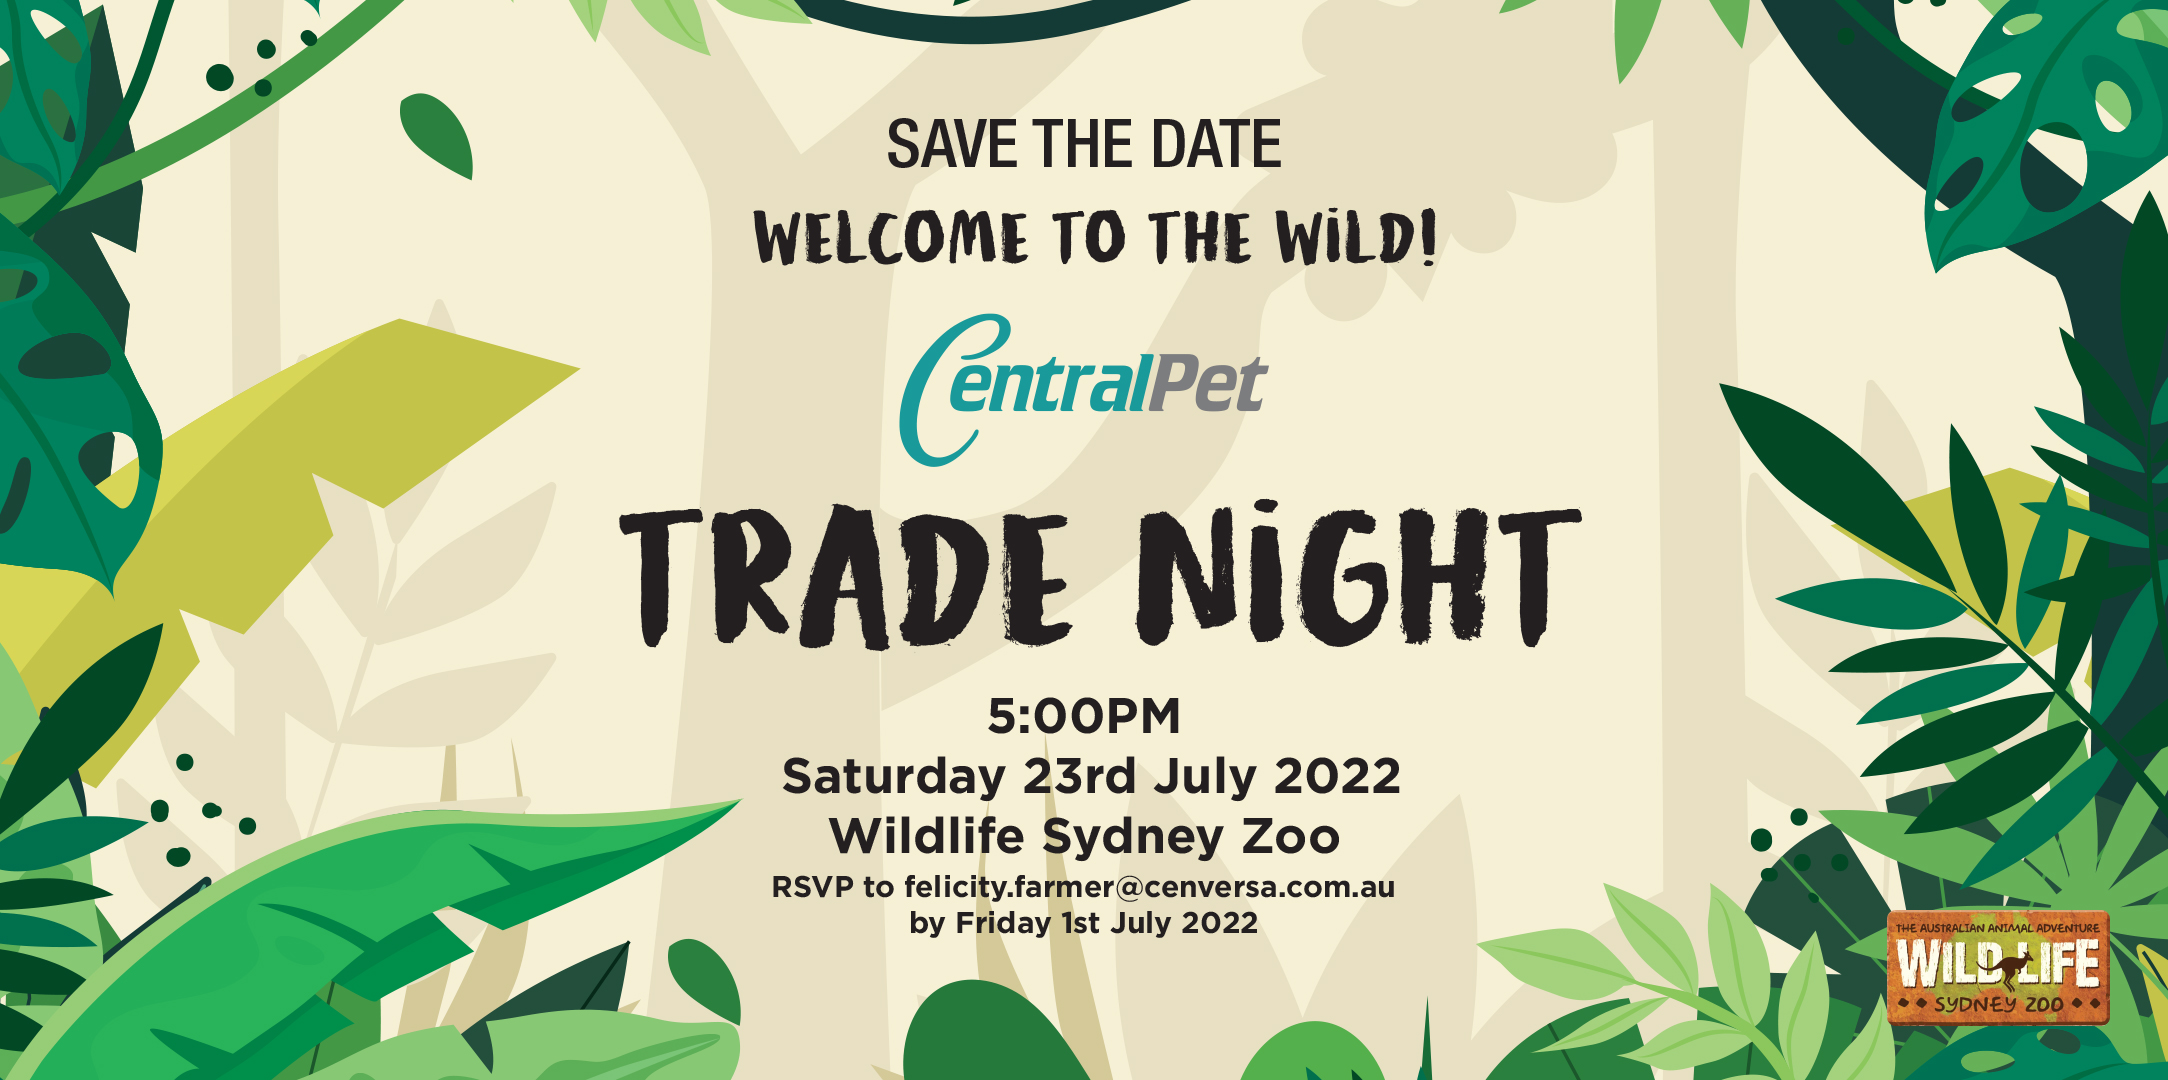 CP-Trade-Night-Save-the-Date-Banner